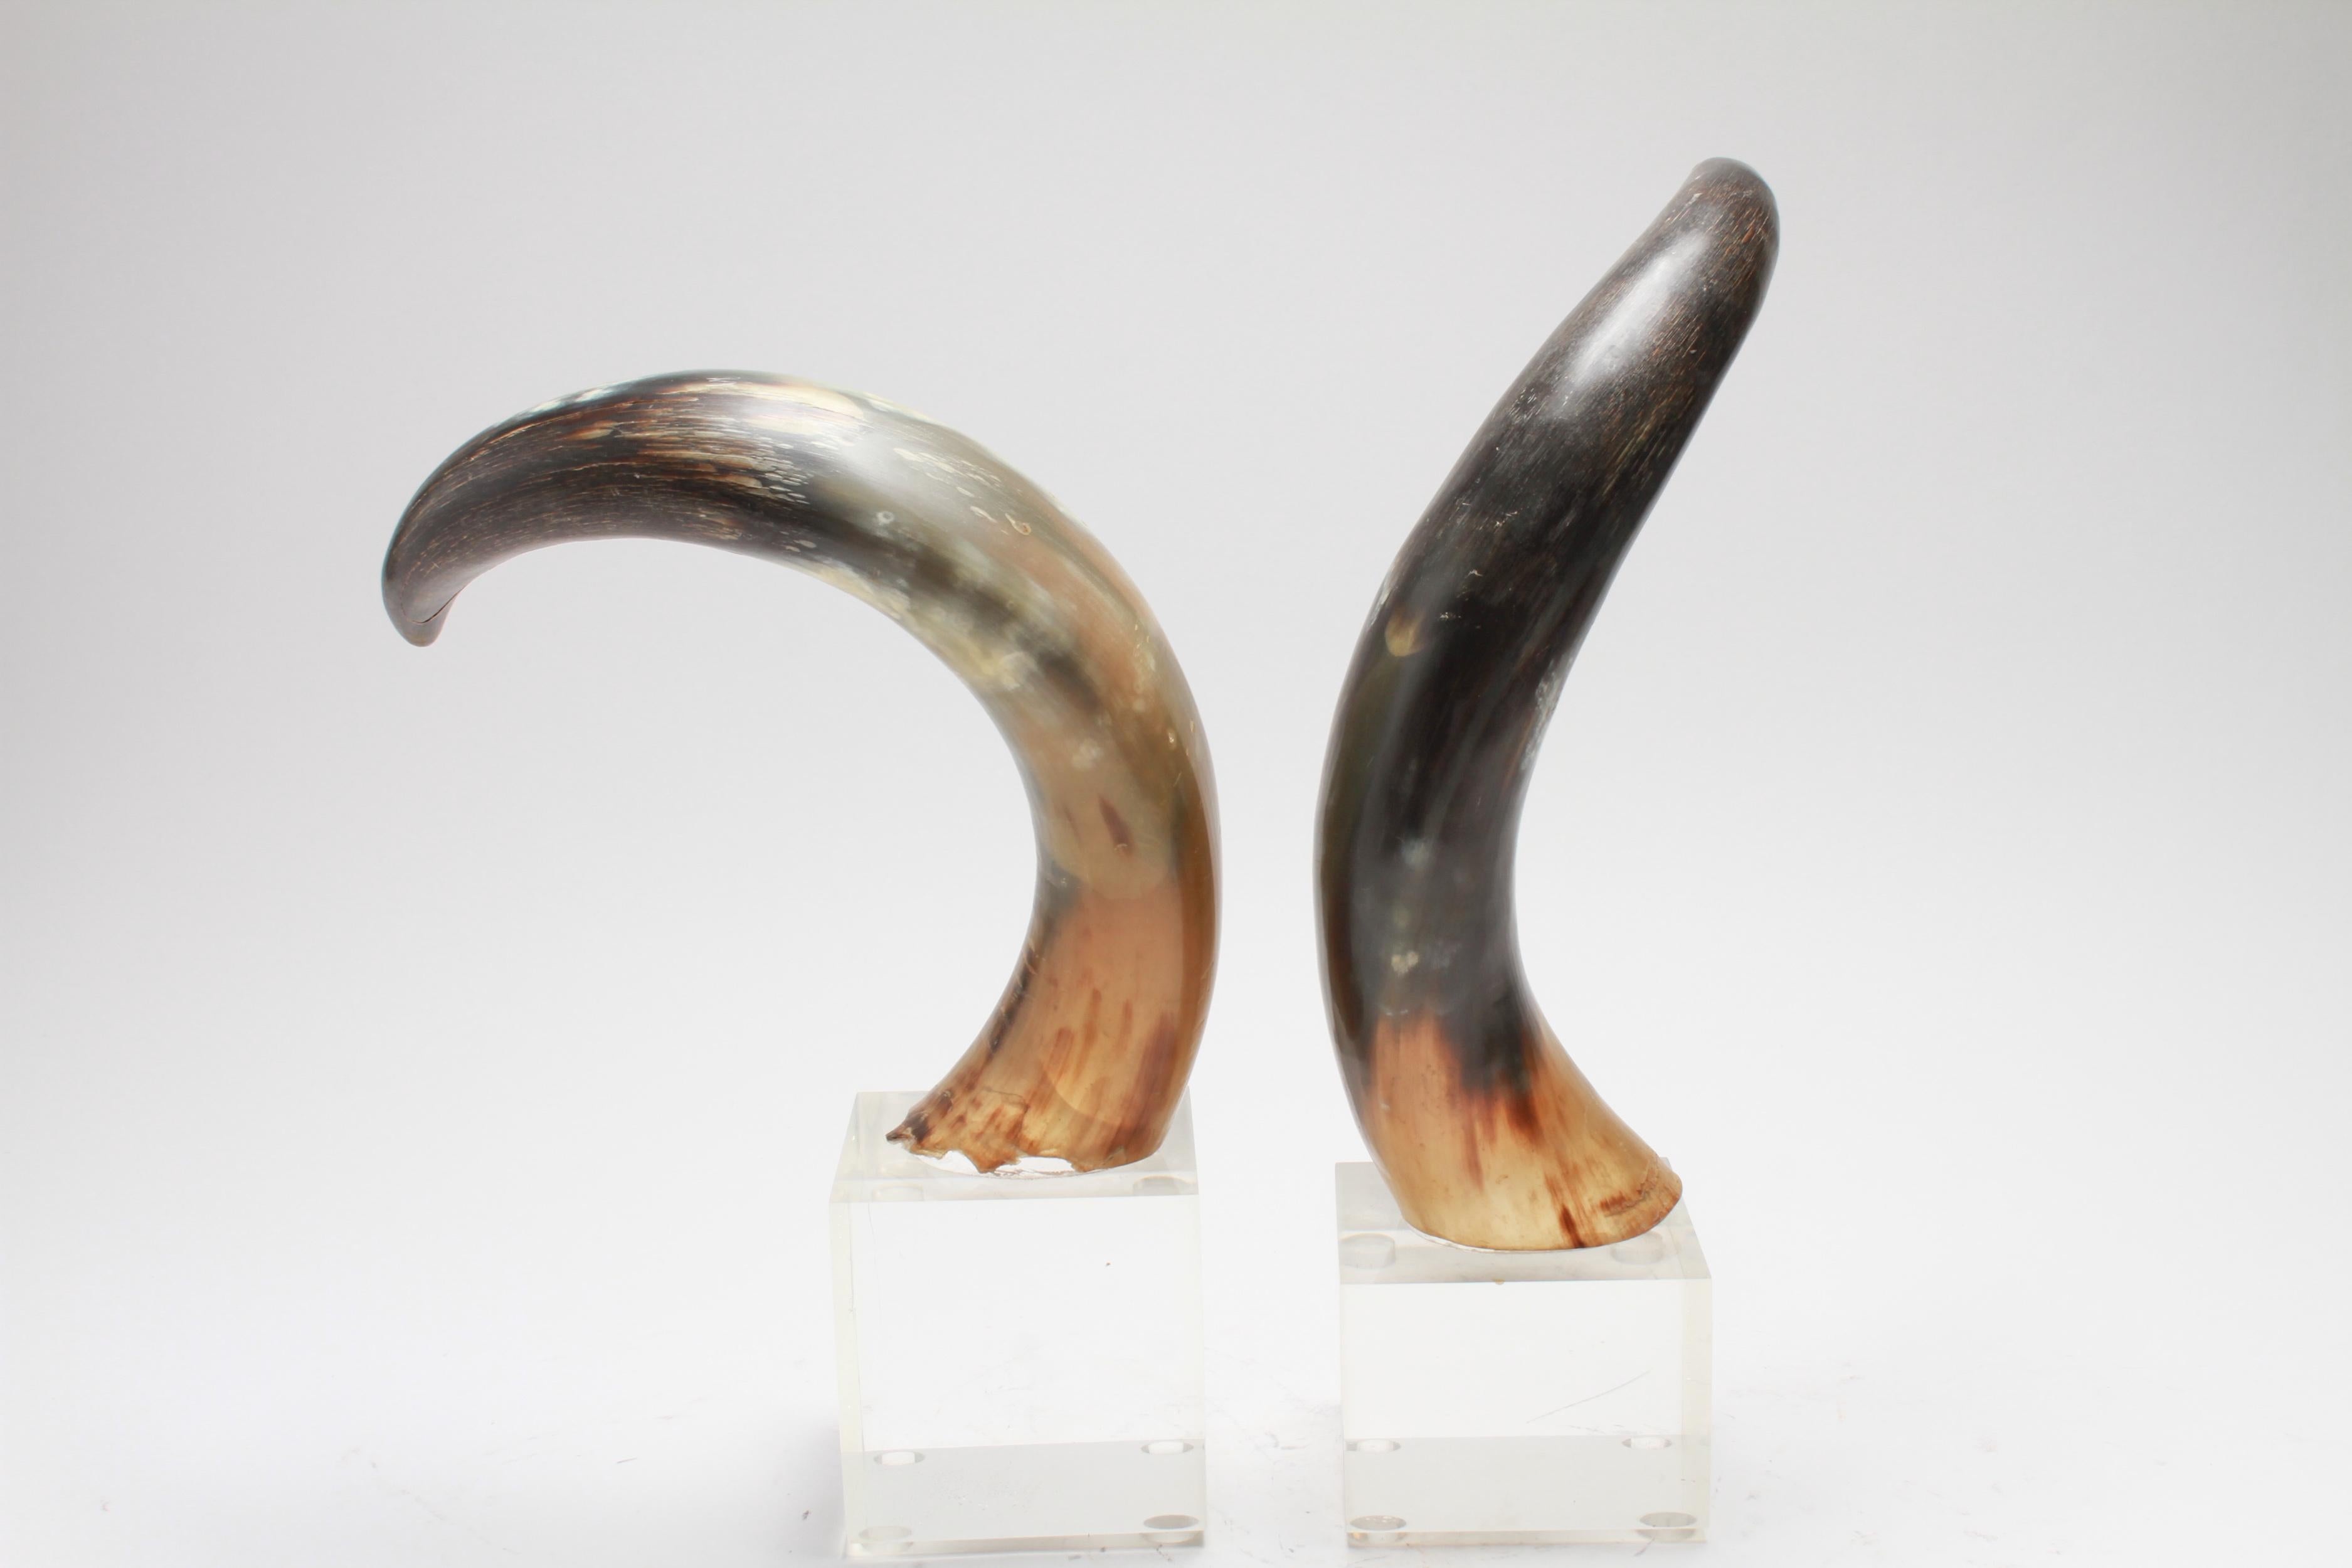 Mid-Century Modern pair of bookends in the shape of cow horns mounted on square acrylic bases. The pair is in great vintage condition with age-appropriate wear and use.